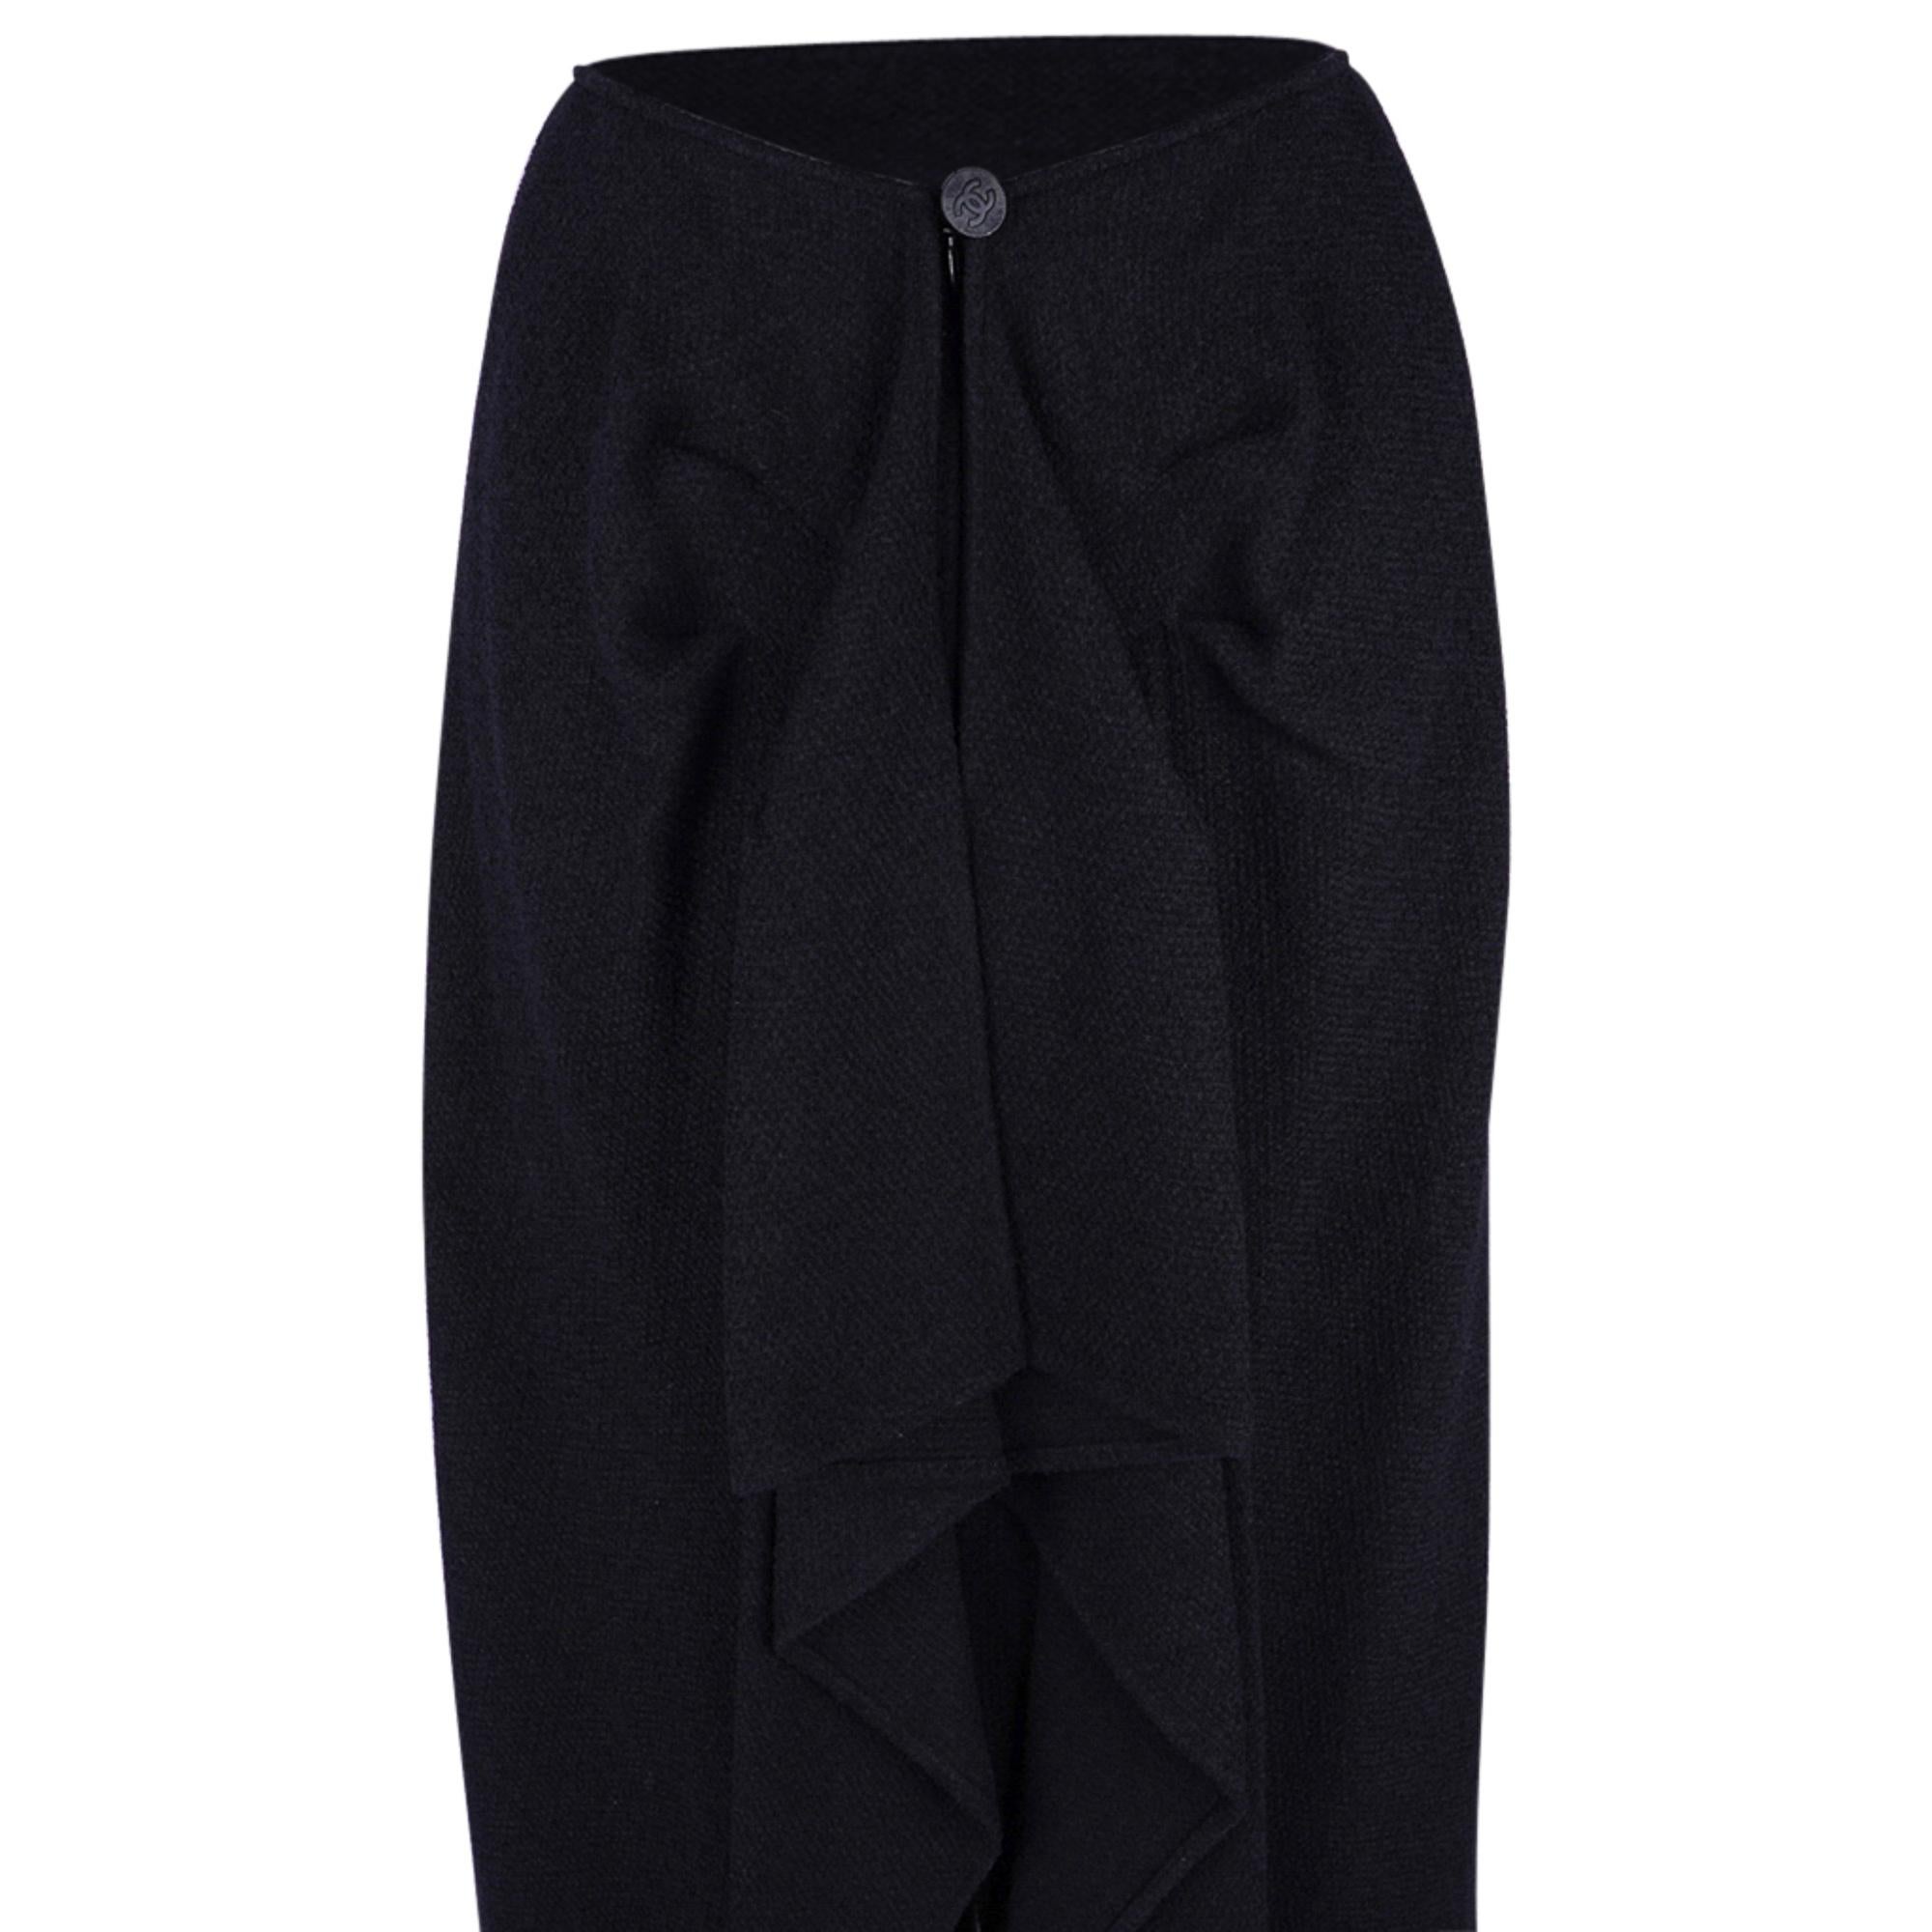 Chanel 98A Long Straight Skirt Beautifully Draped Rear 36 / 4 In Excellent Condition For Sale In Miami, FL